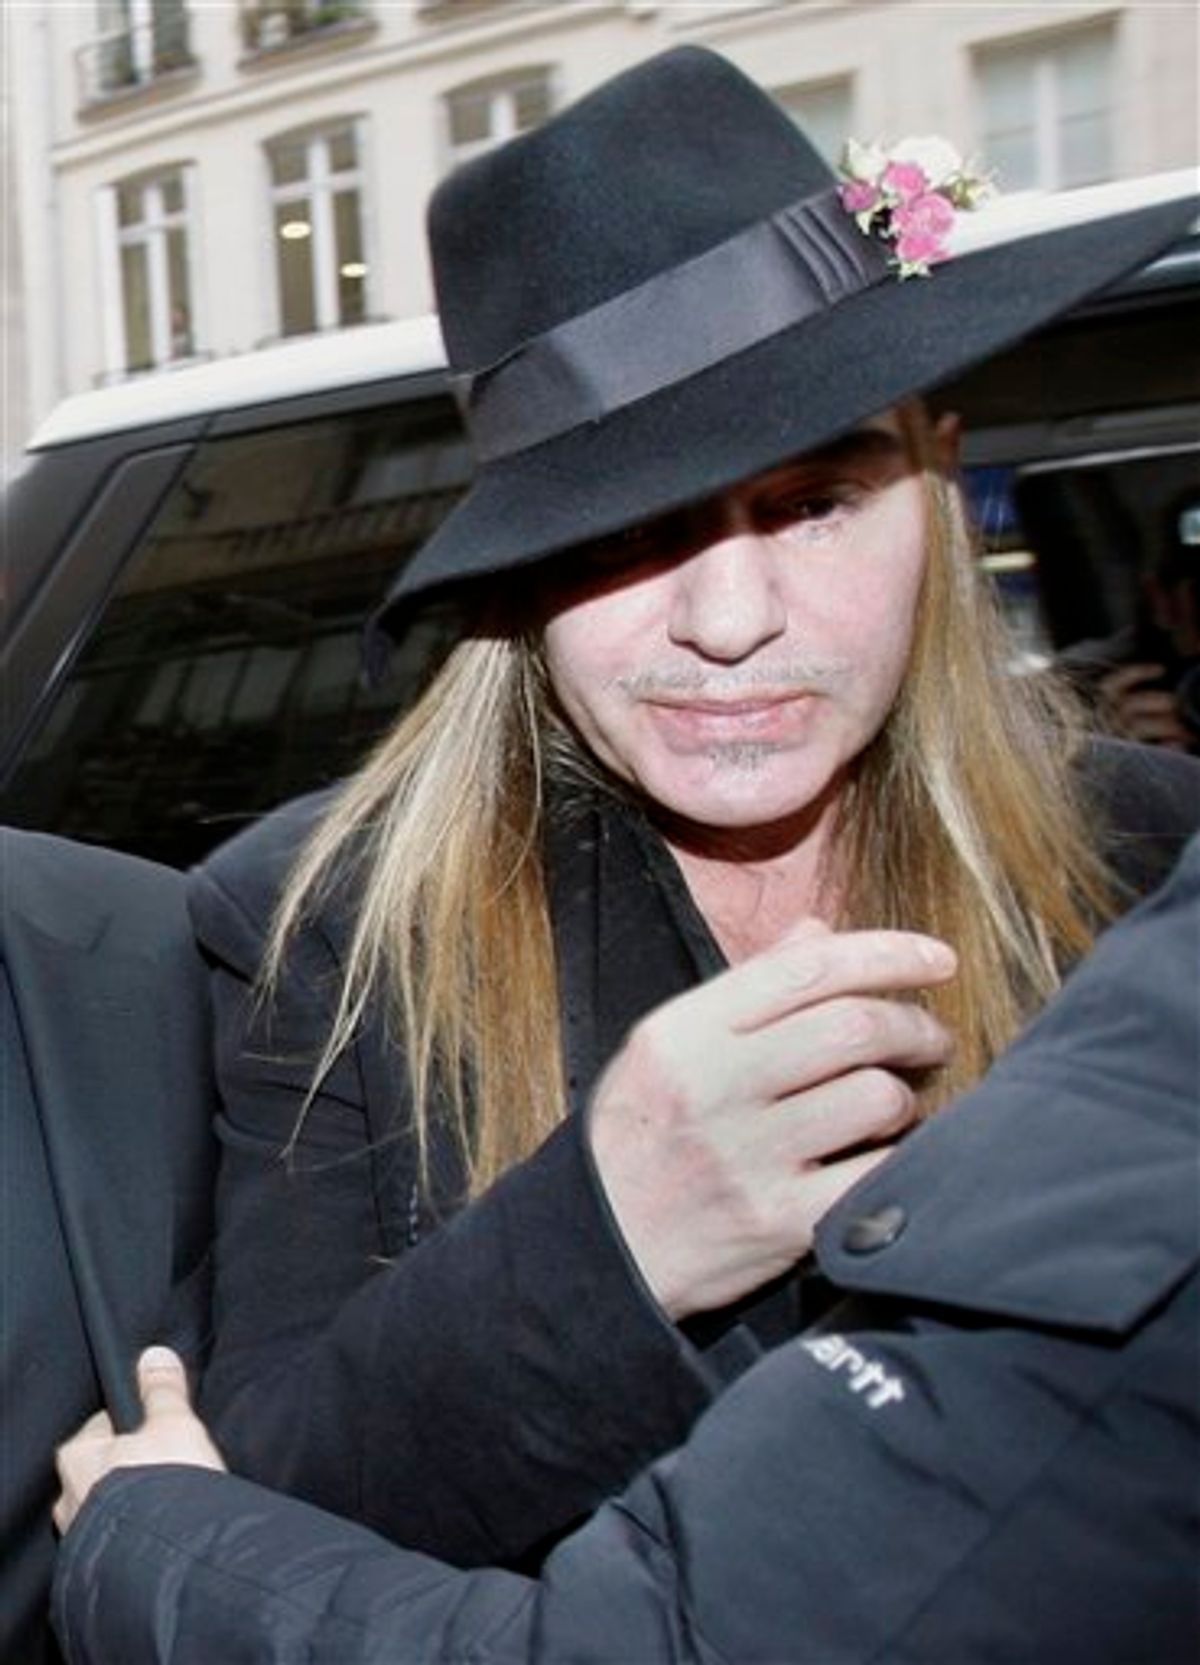 FILE - In this Monday, Feb. 28, 2011 file photo, Fashion designer John Galliano arrives at a police station in Paris. Christian Dior have fired Galliano  in wake of alleged anti-Semitic remarks he made during a dispute at a trendy Paris cafe. (AP Photo/Michel Euler, File)   (AP)